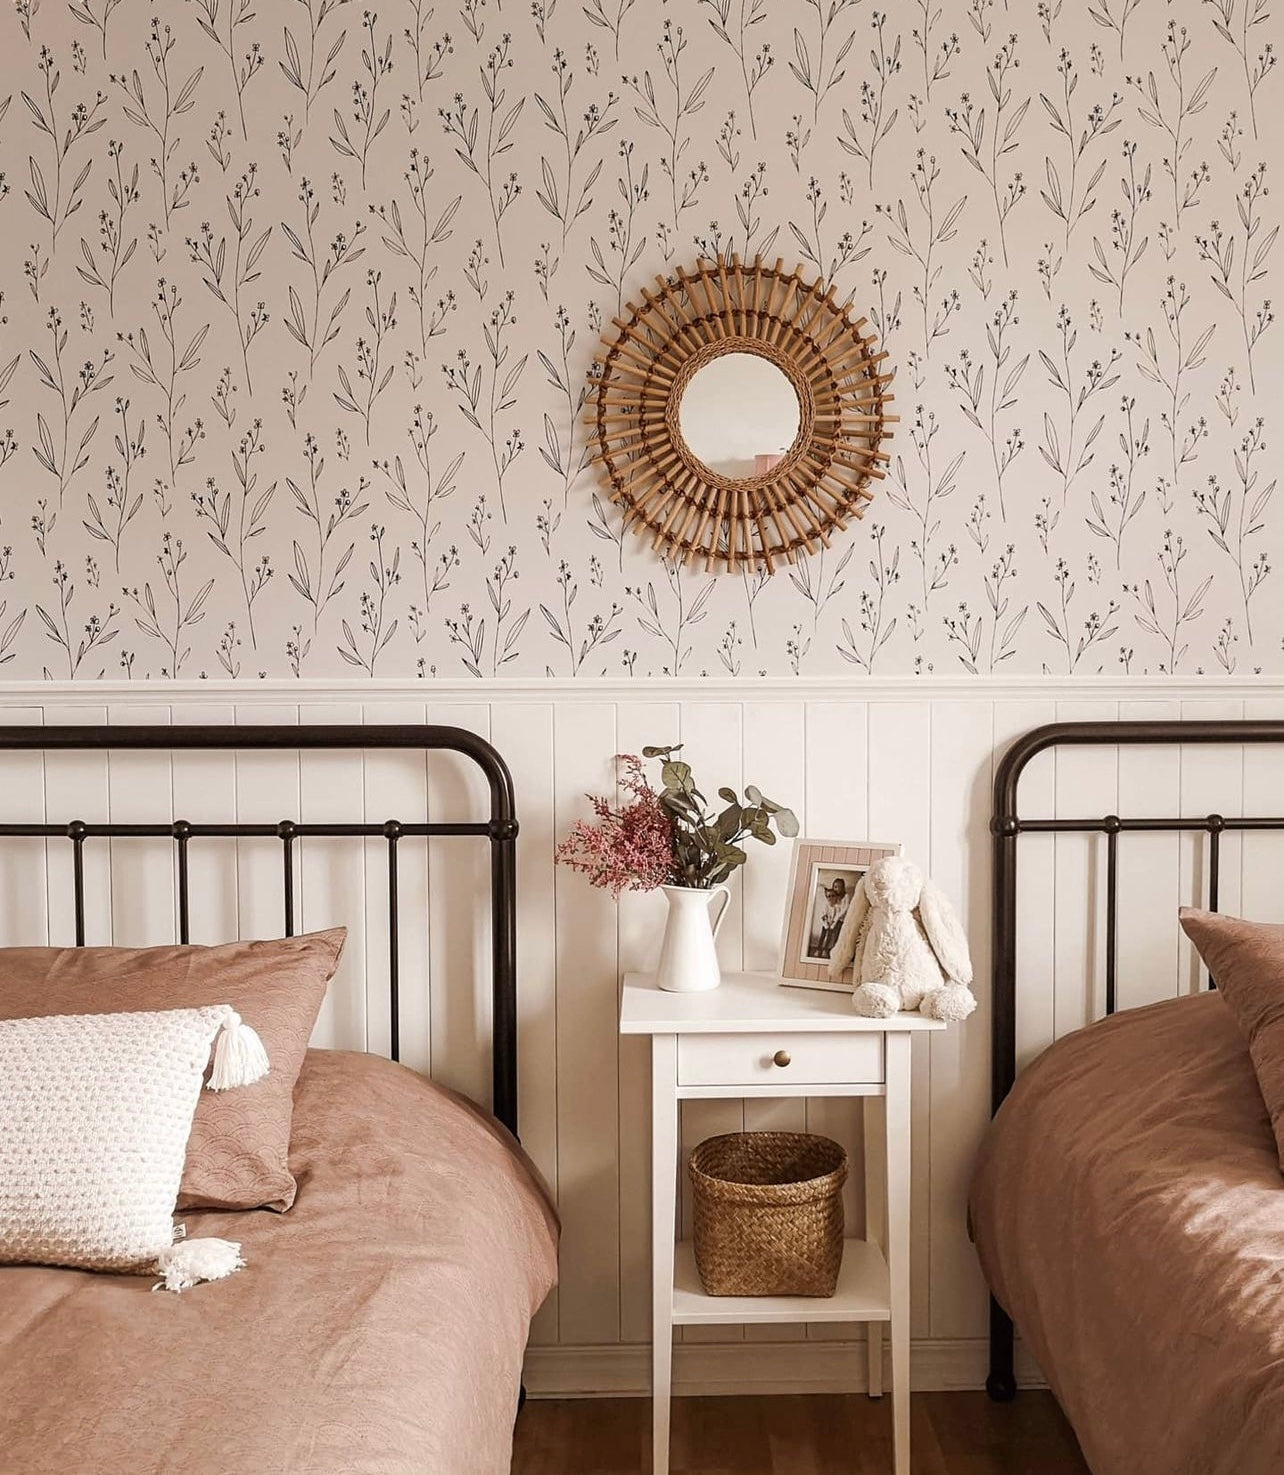 A bedroom with two single beds against a wall covered in Dainty Minimal Floral Wallpaper, exhibiting a black botanical pattern on a white backdrop, complemented by vintage metal bed frames and earth-toned bedding.